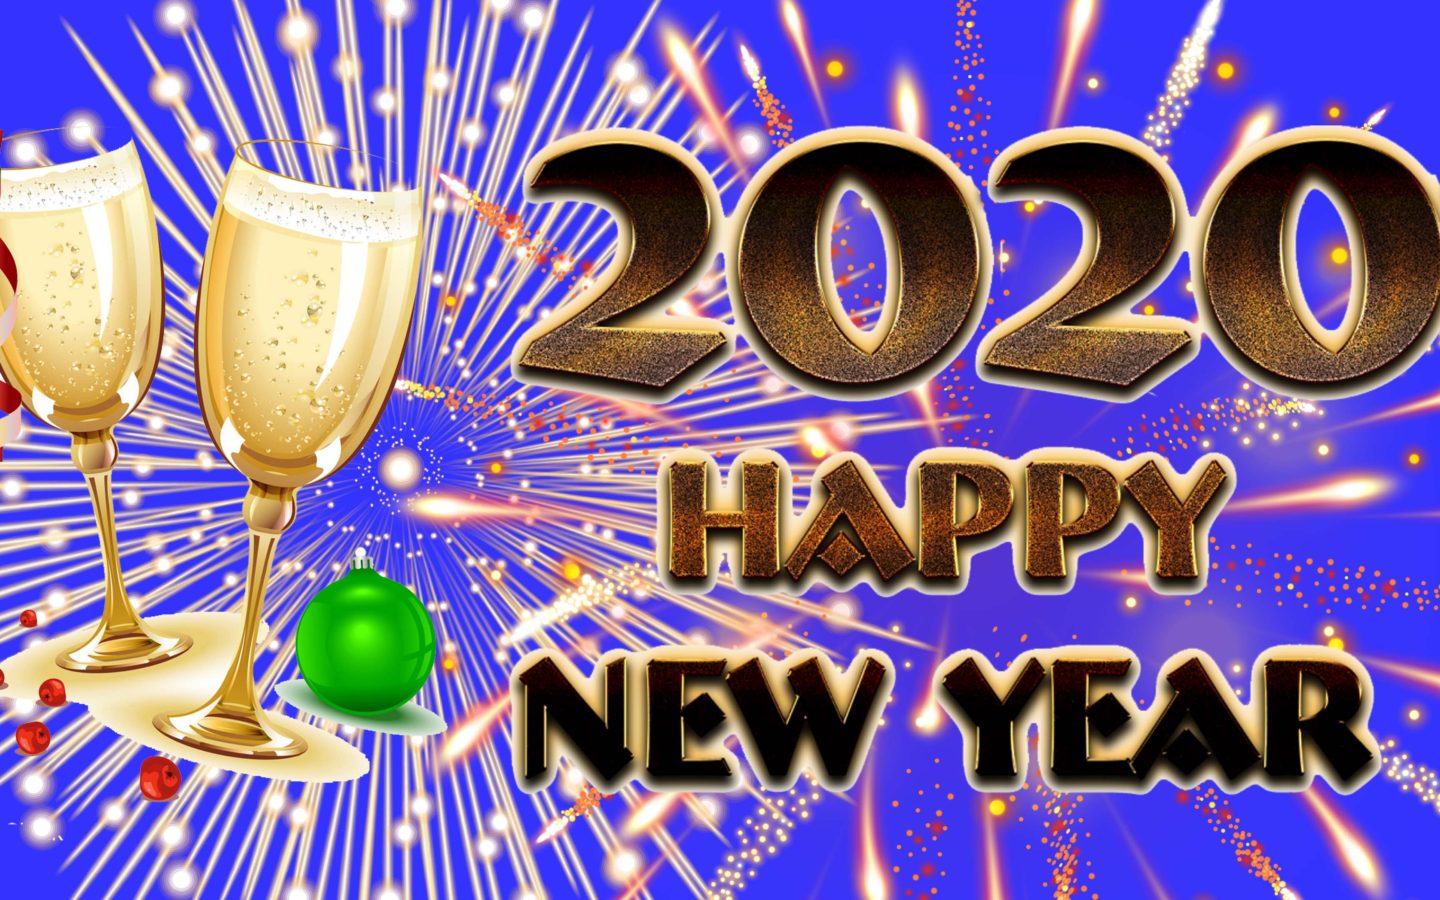 30 Beautiful New Year 2020 HD Wallpapers to Beautify Your ...